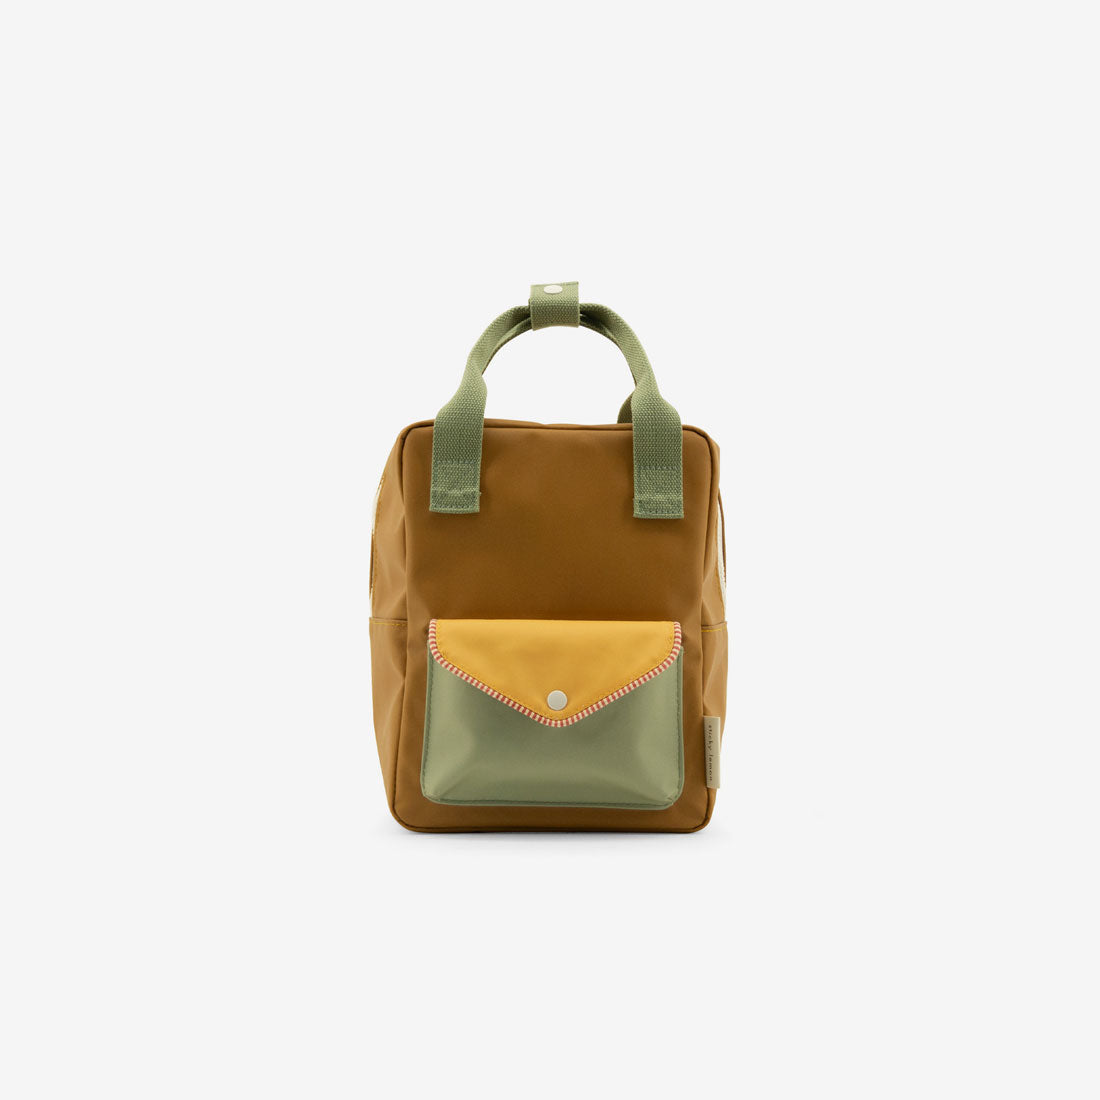 Small rPET Backpack - Meet Me in the Meadows - Khaki Green